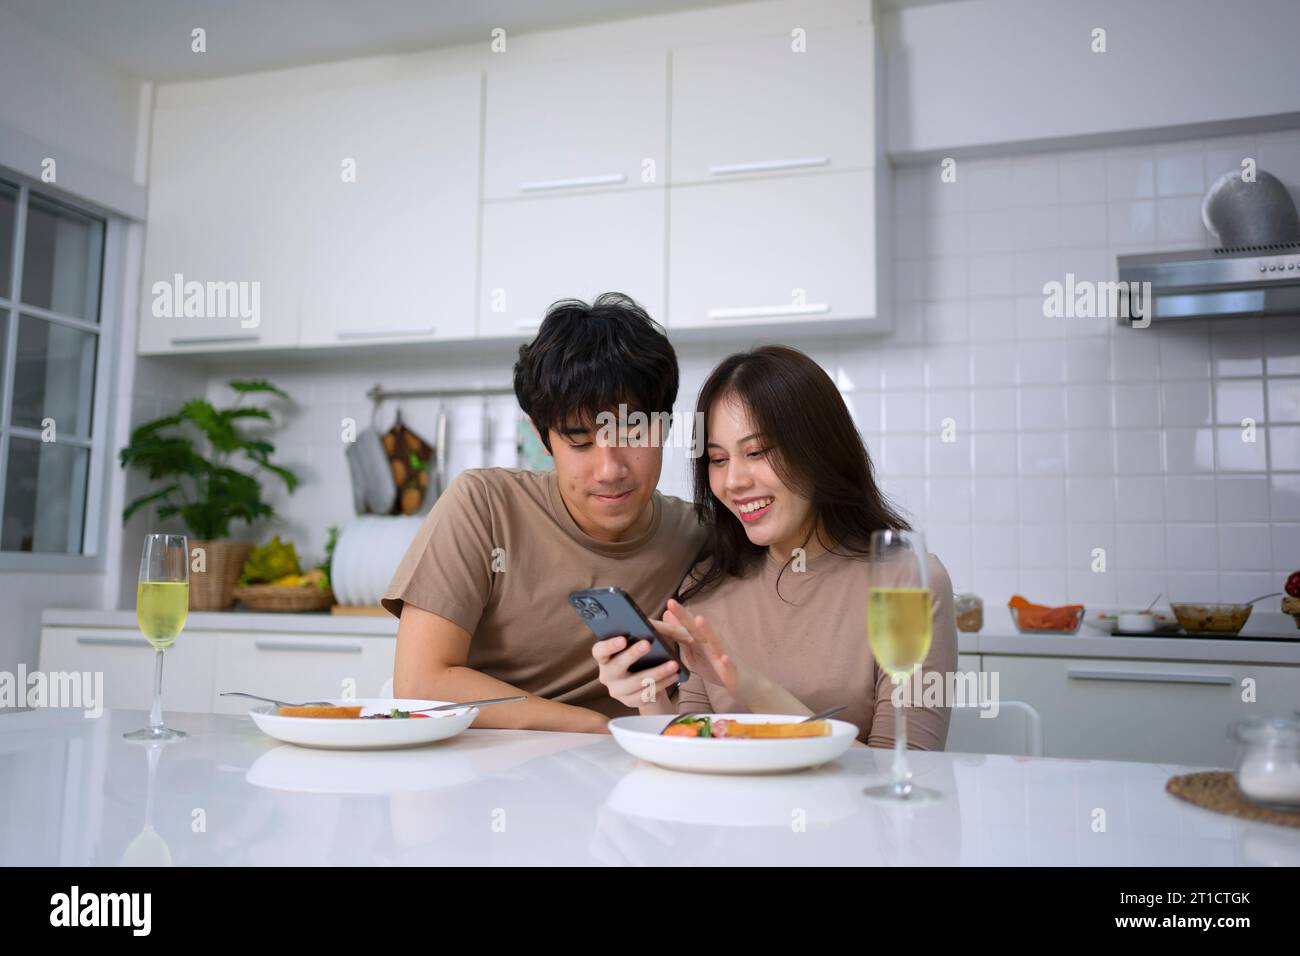 Young couple is shopping online in kitchen. Lifestyle and leisure activity concept. Stock Photo